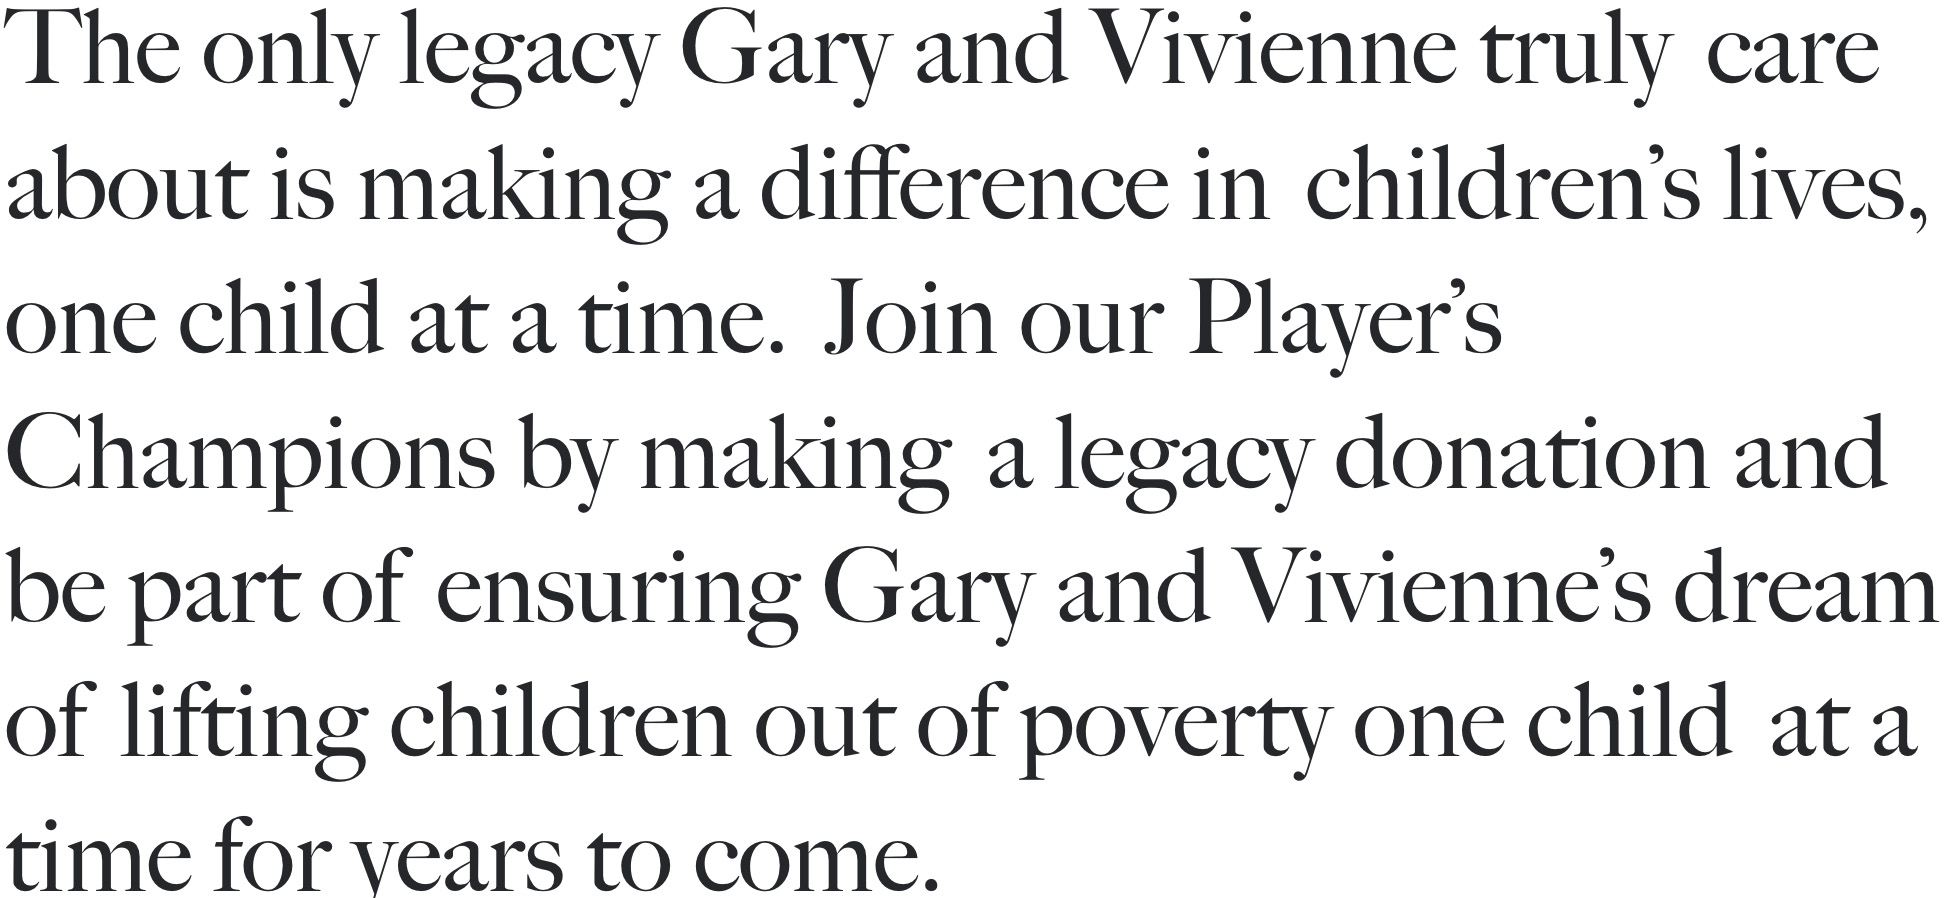 THE PLAYER LEGACYThe only legacy Gary and Vivienne trulycare about is making a difference inchildren's lives, one child at a time.Join our Player's Champions by makinga legacy donation and be part ofensuring Gary and Vivienne's dream oflifting children out of poverty one childat a time for years to come. 